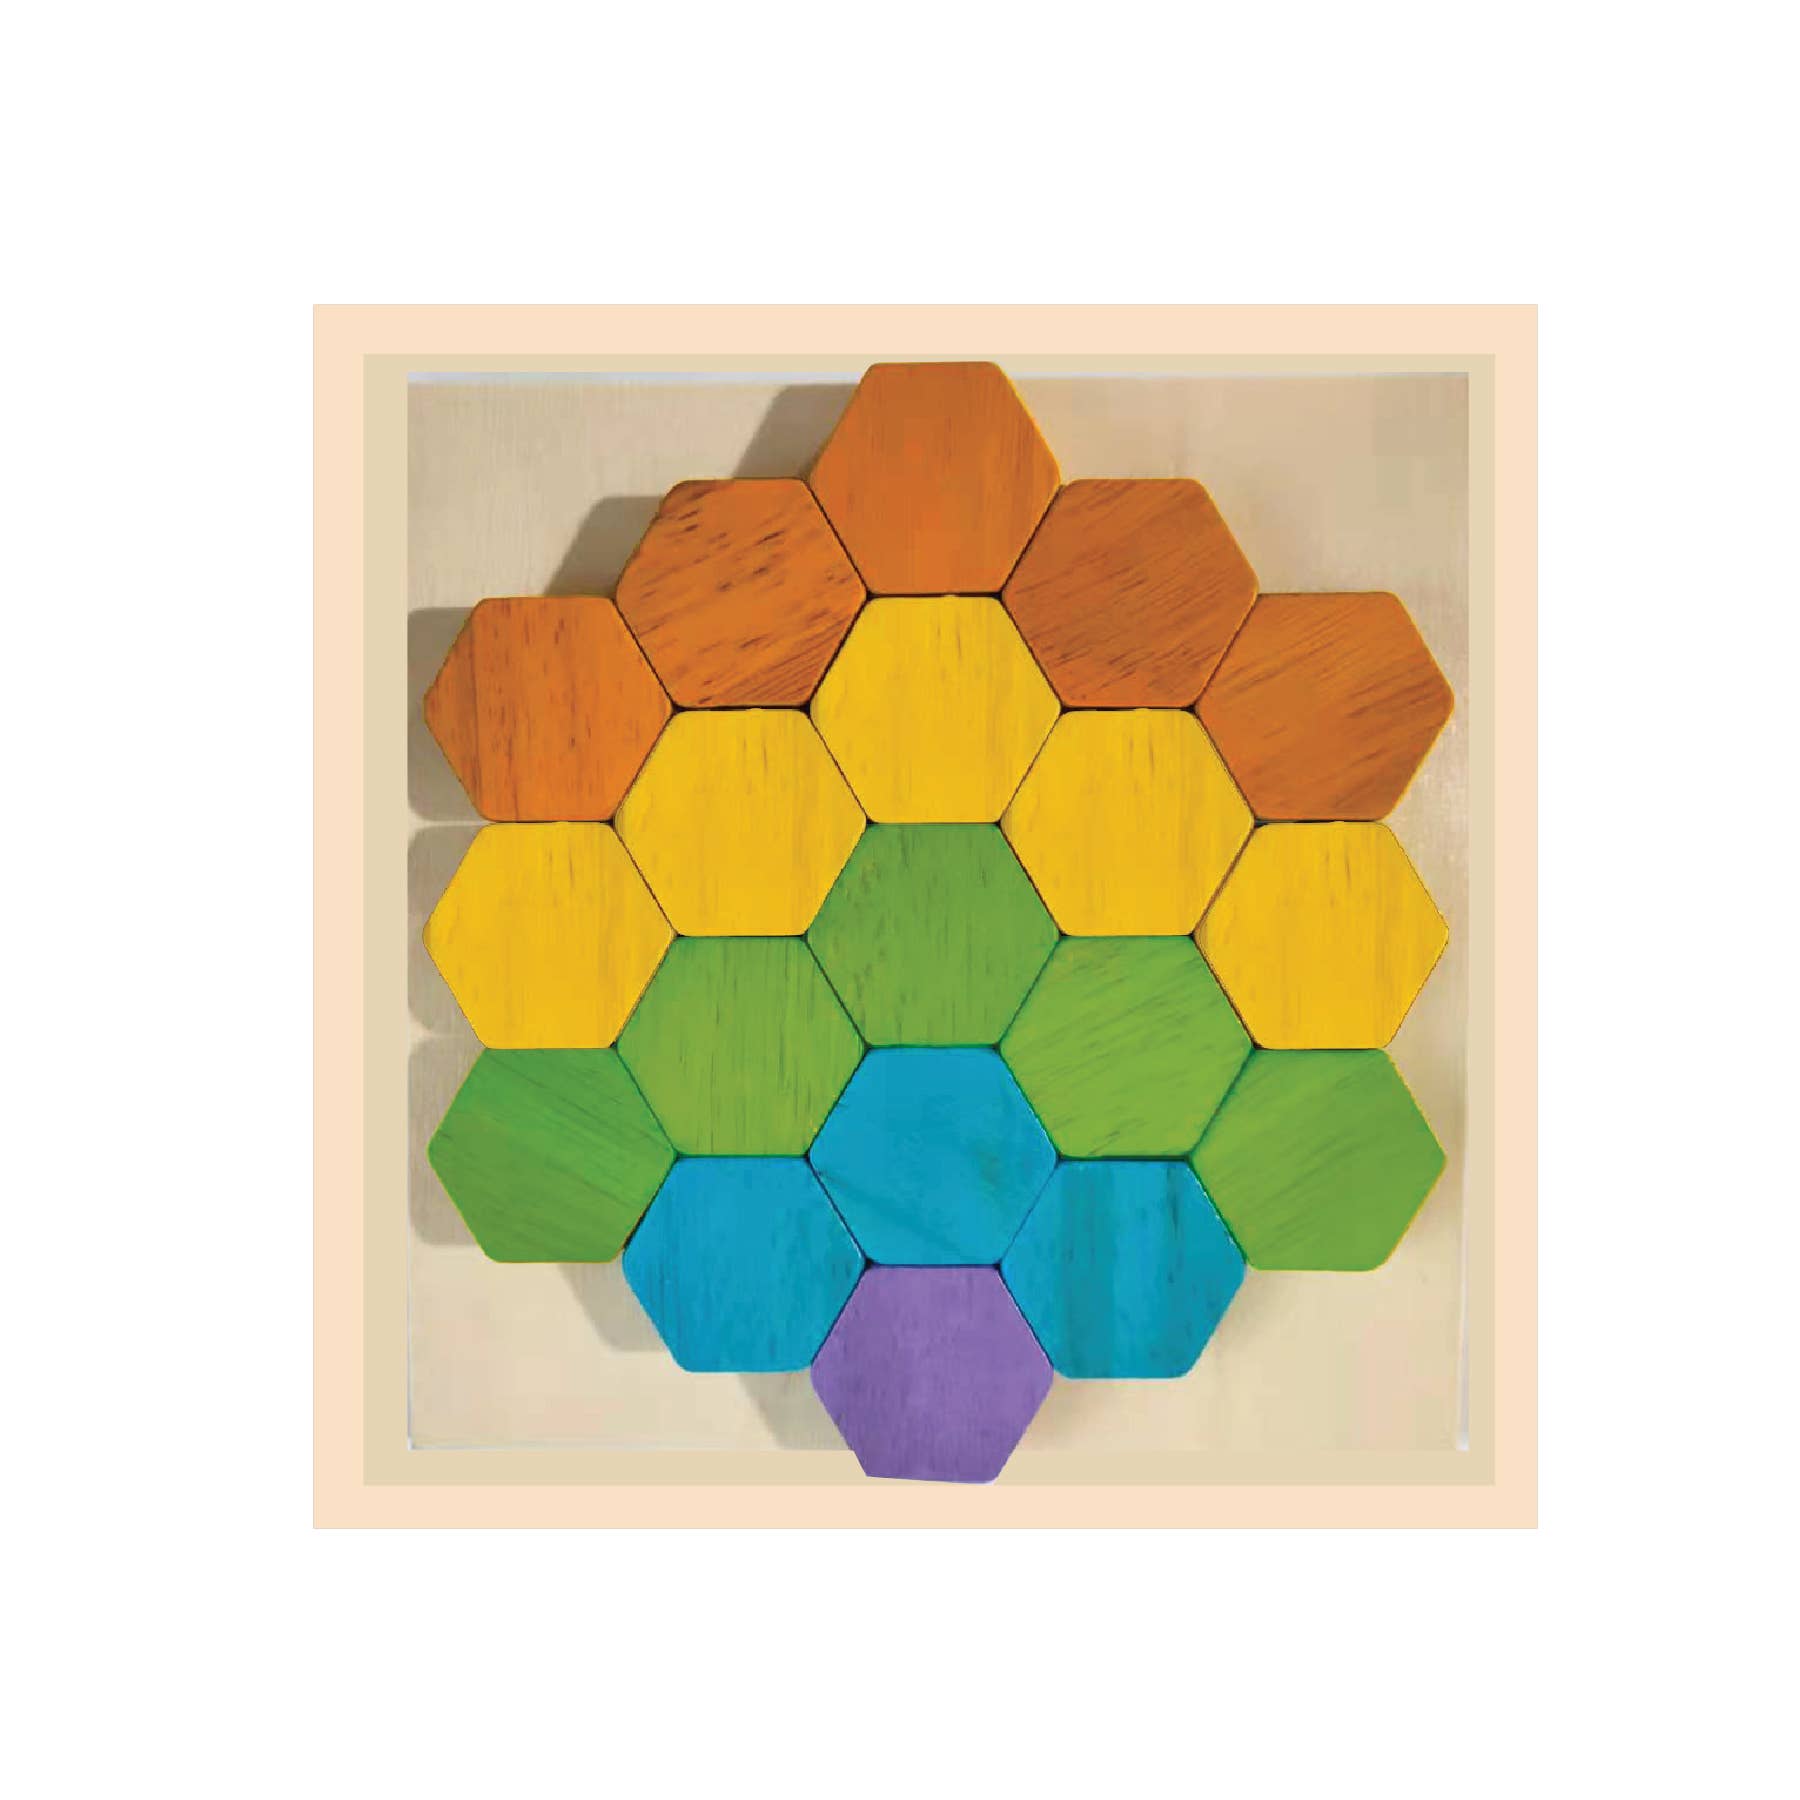 Hexagon Matching Game - New for 2021!